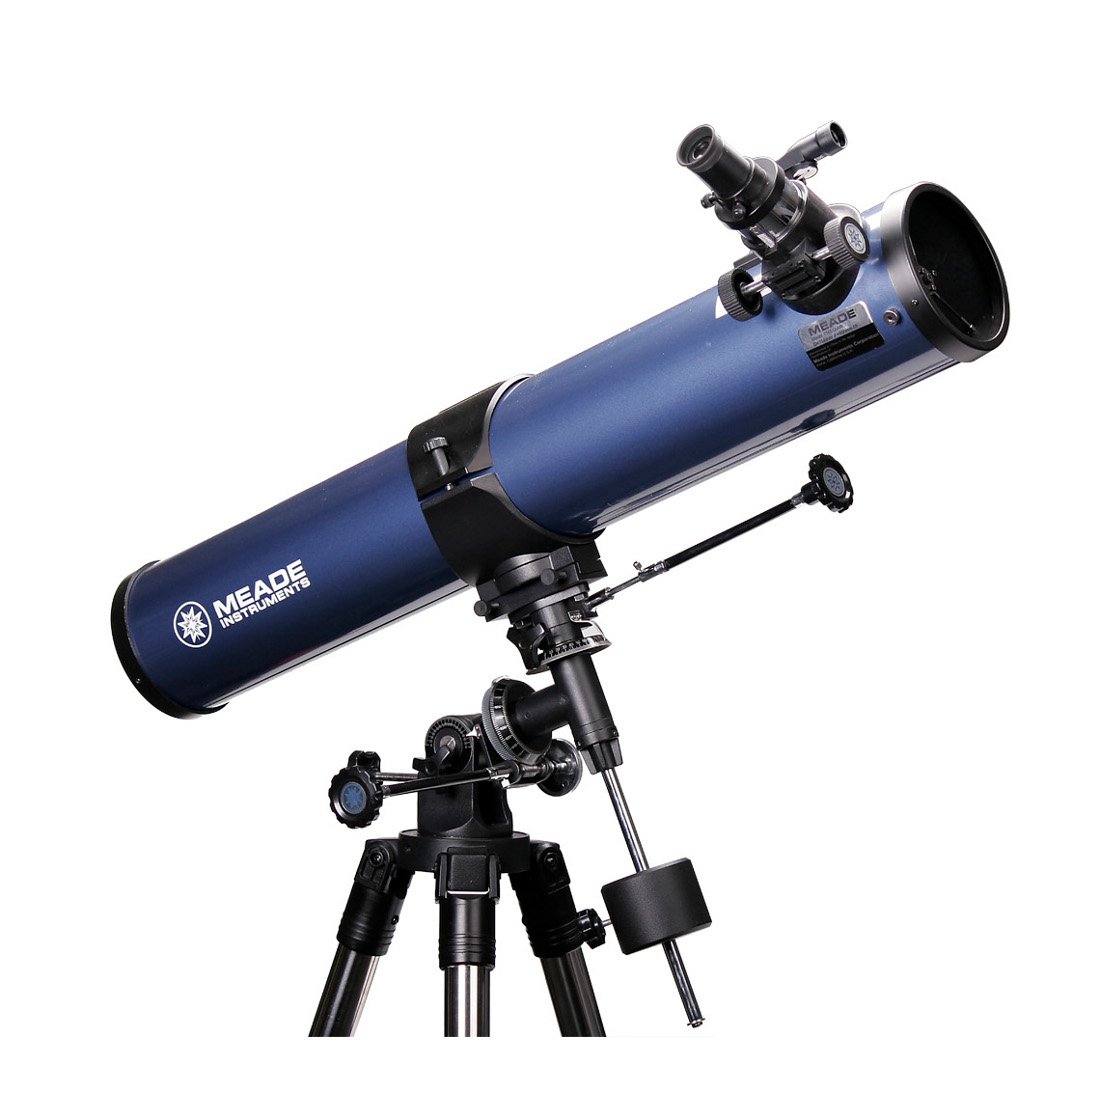 difference between reflector and refractor off 58% - www.abrafiltros.org.br